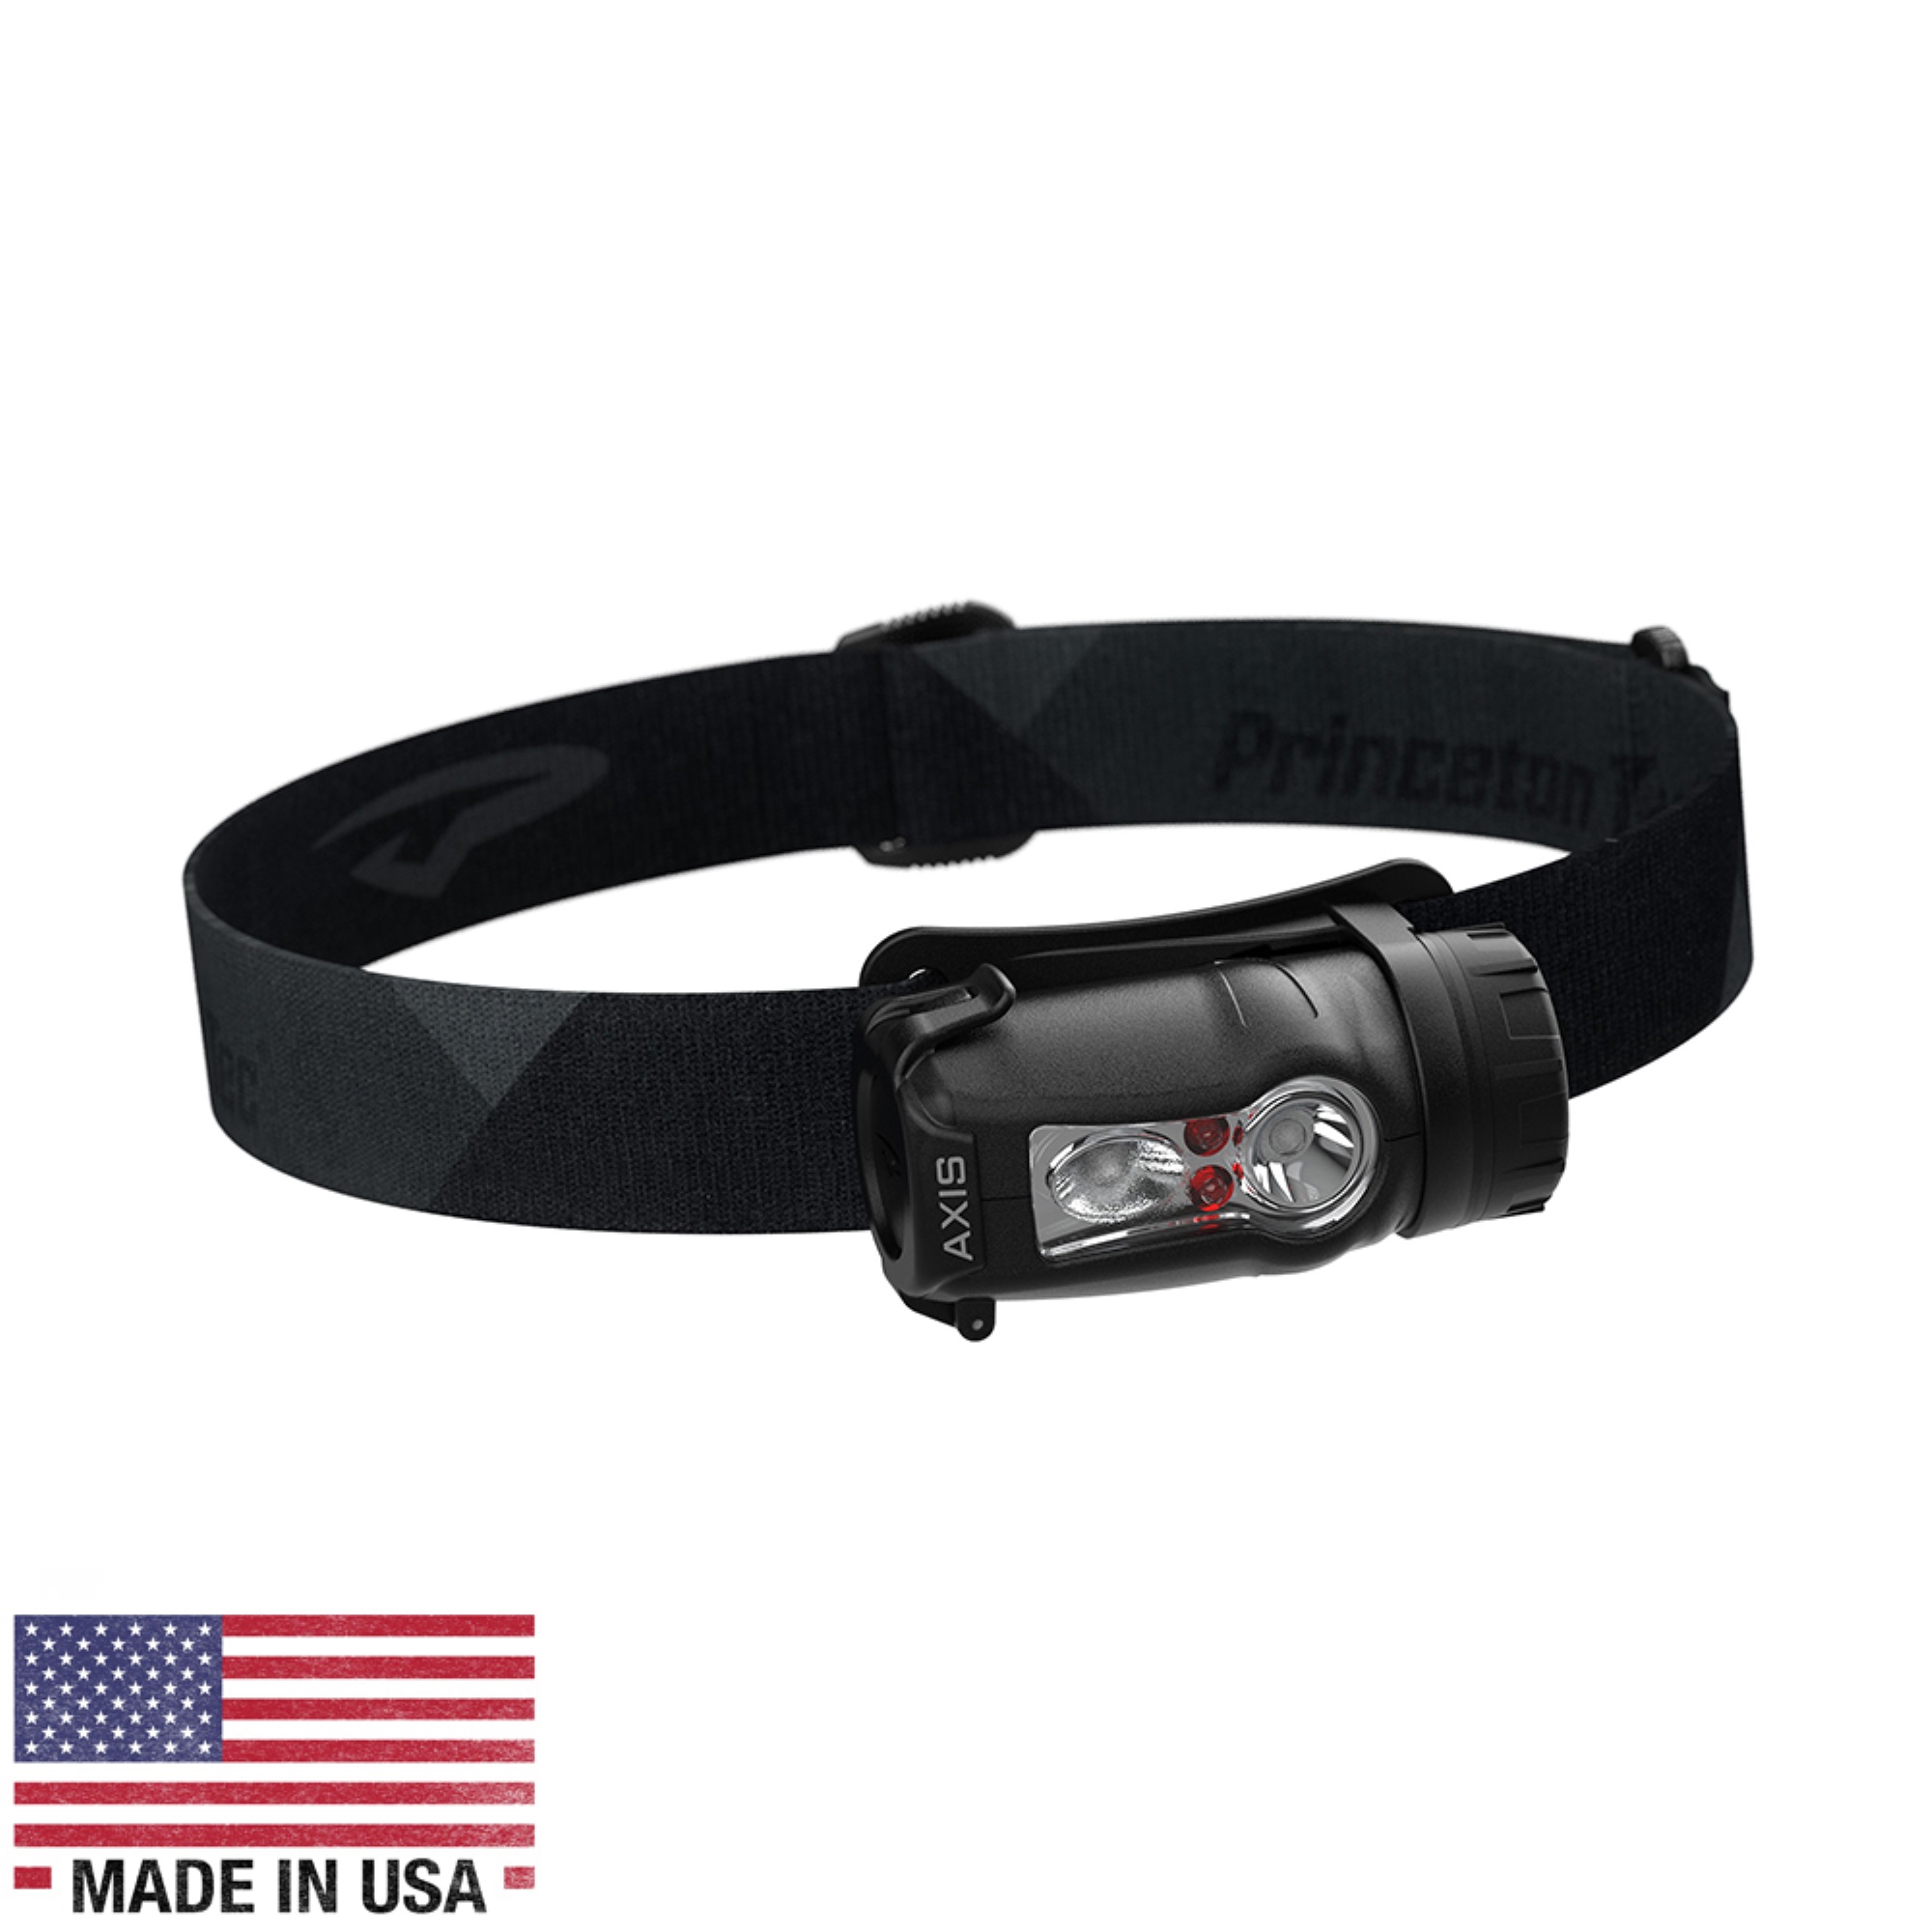 Princeton Tec Axis Rechargeable LED HeadLamp - Black/Grey - image 2 of 2